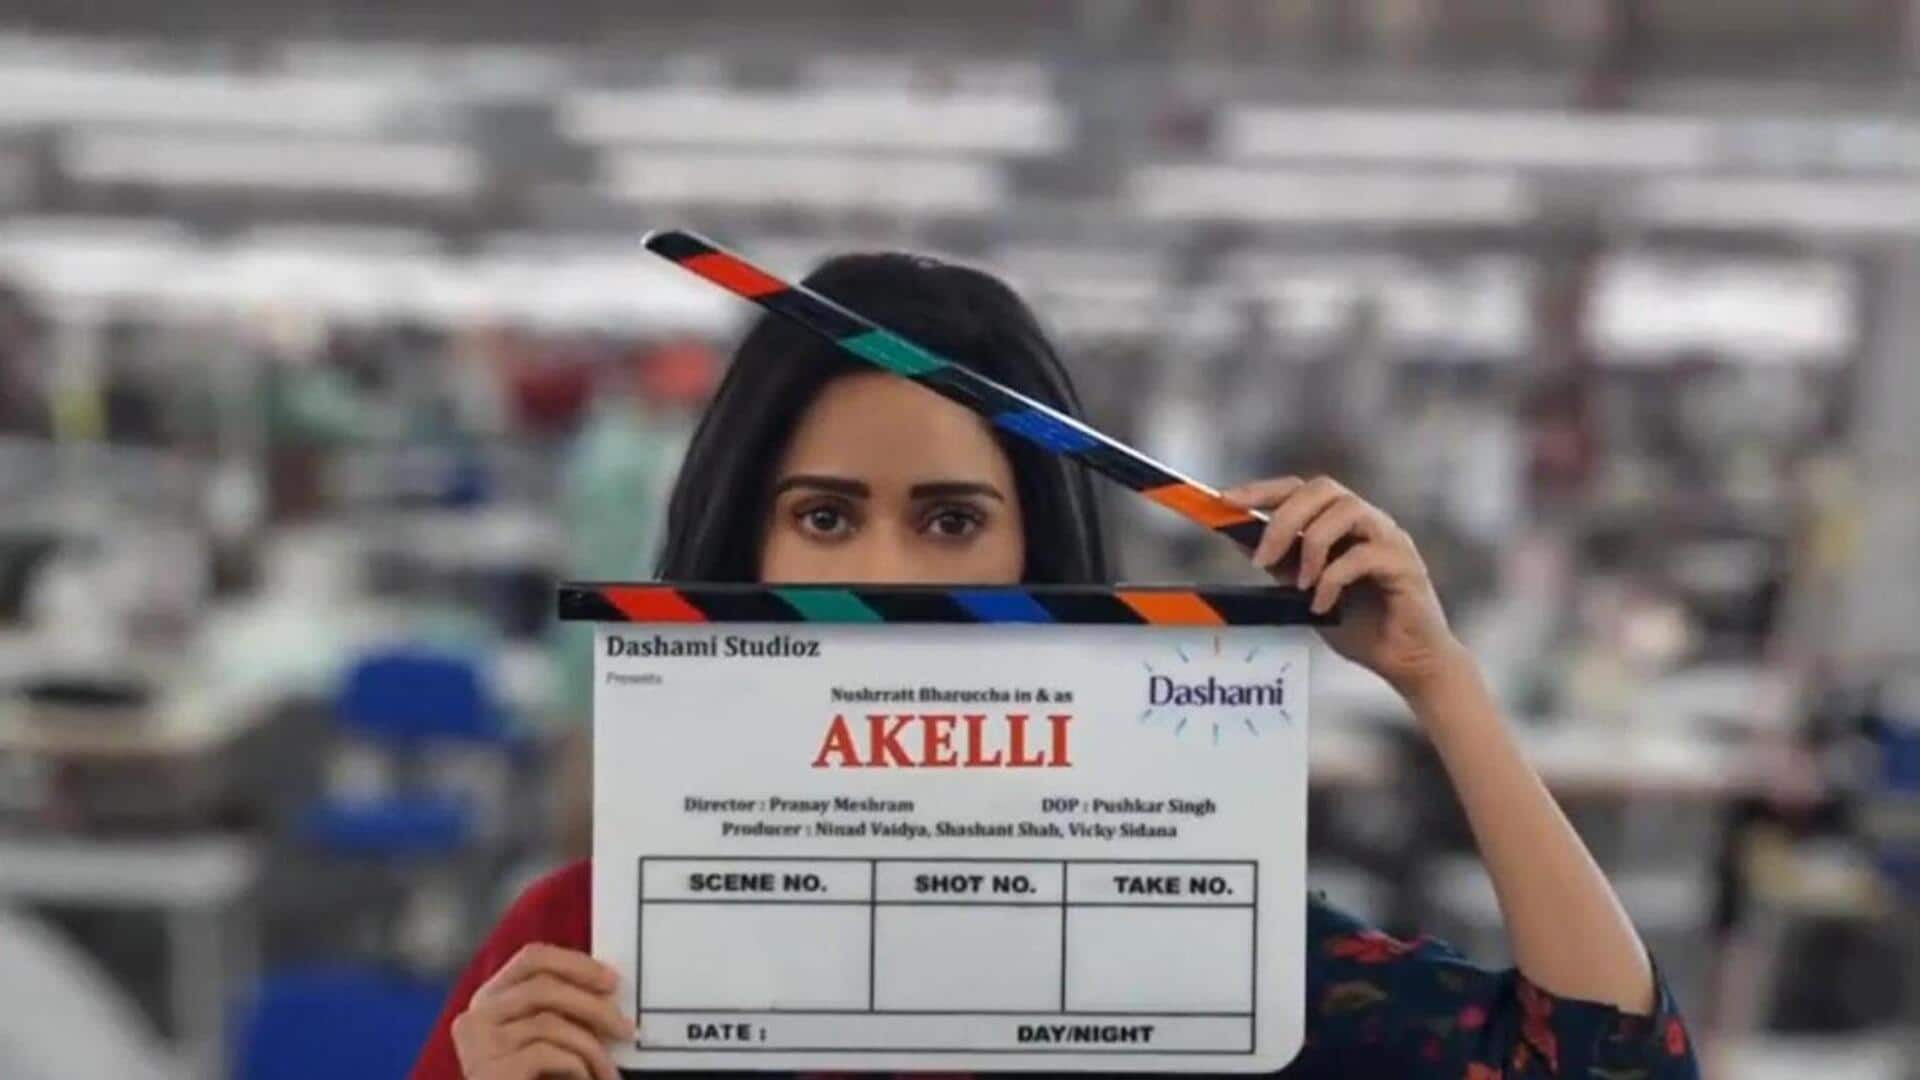 #BoxOfficeCollection: 'Akelli' is headed for a commercial disaster